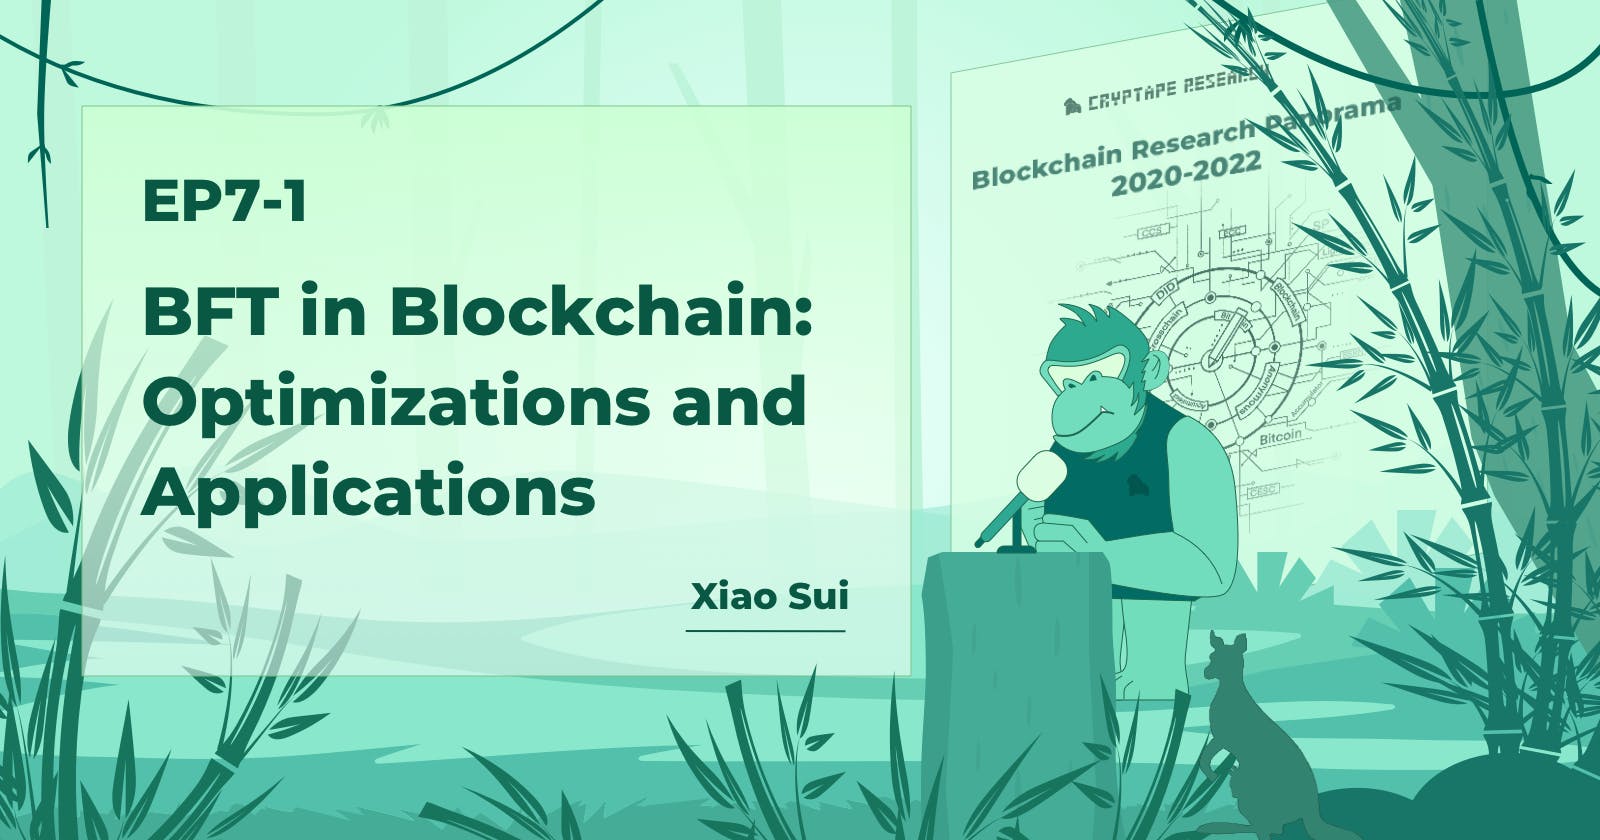 BFT in Blockchain: Optimizations and Applications